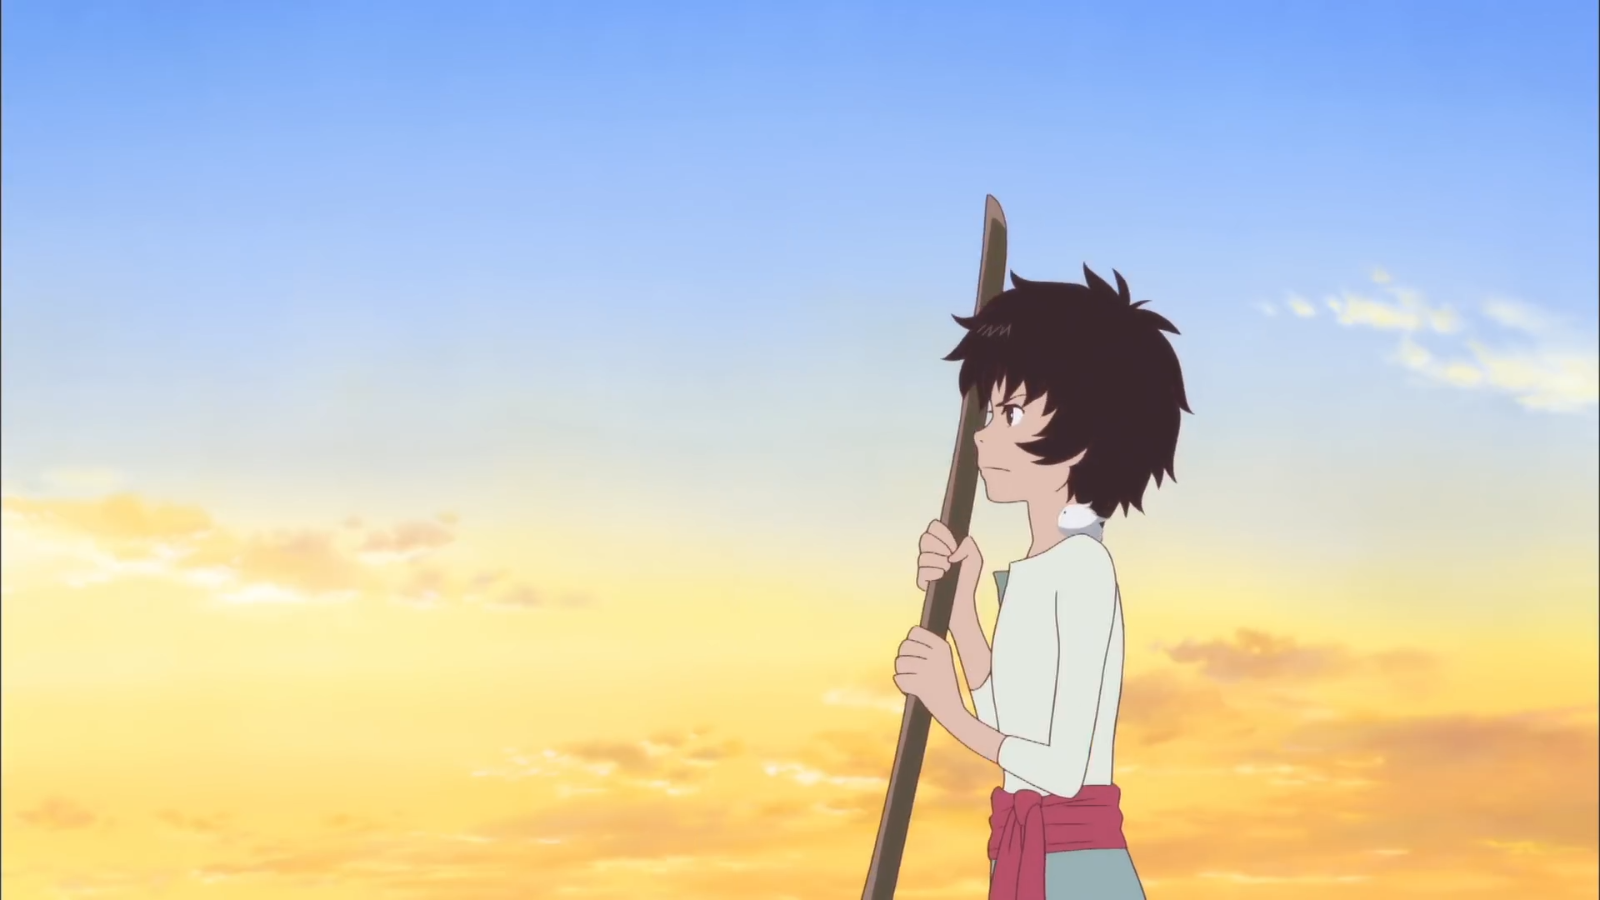 Kyta and his sword   From The Boy and the Beast   Bakemono